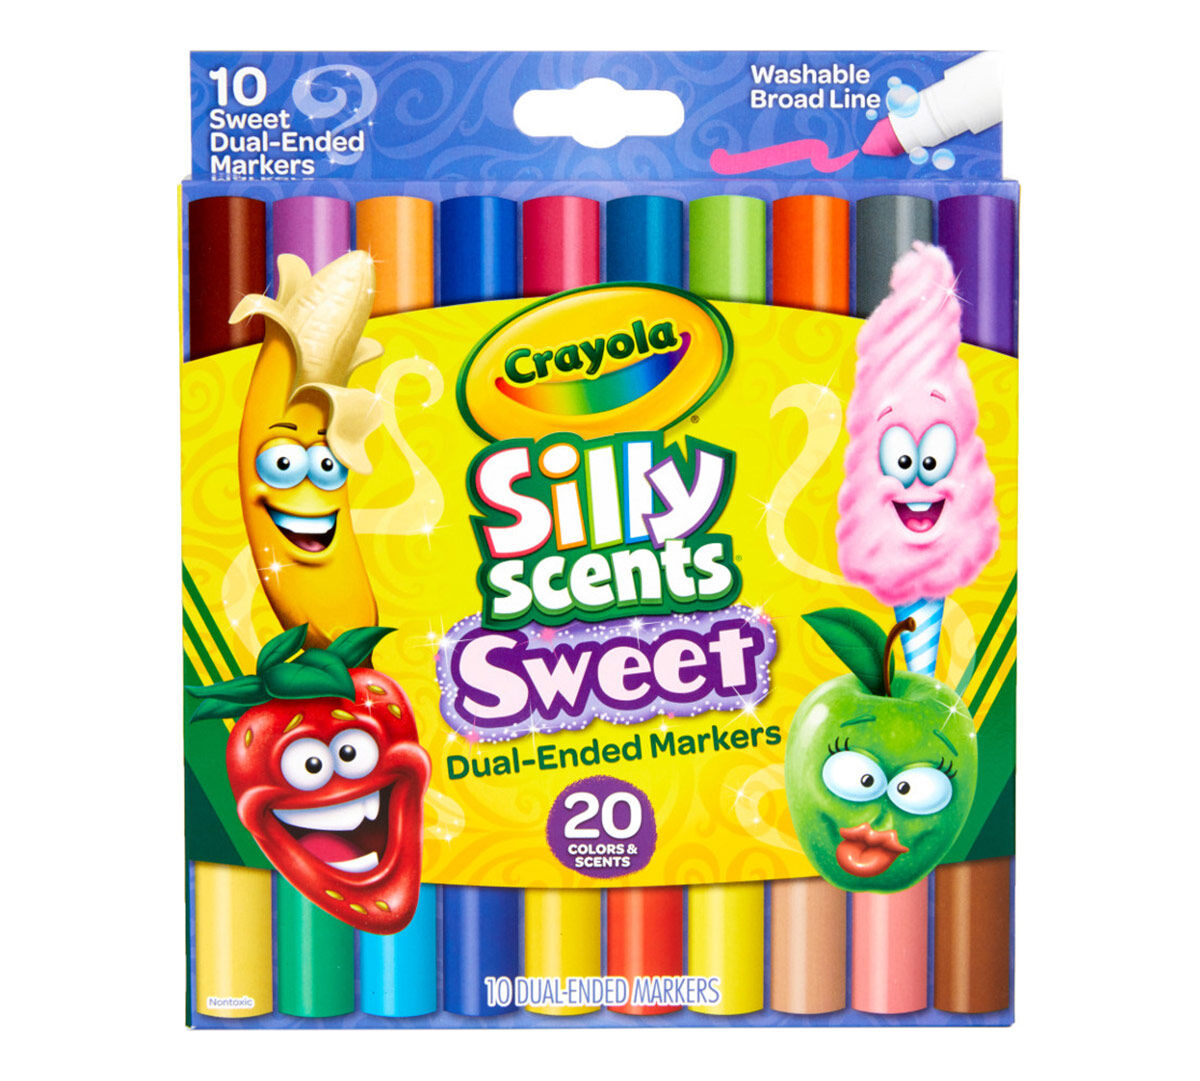 Crayola Silly Scents Dual-Ended Art Markers, School Supplies, Beginner Child, 10 Count - image 2 of 6